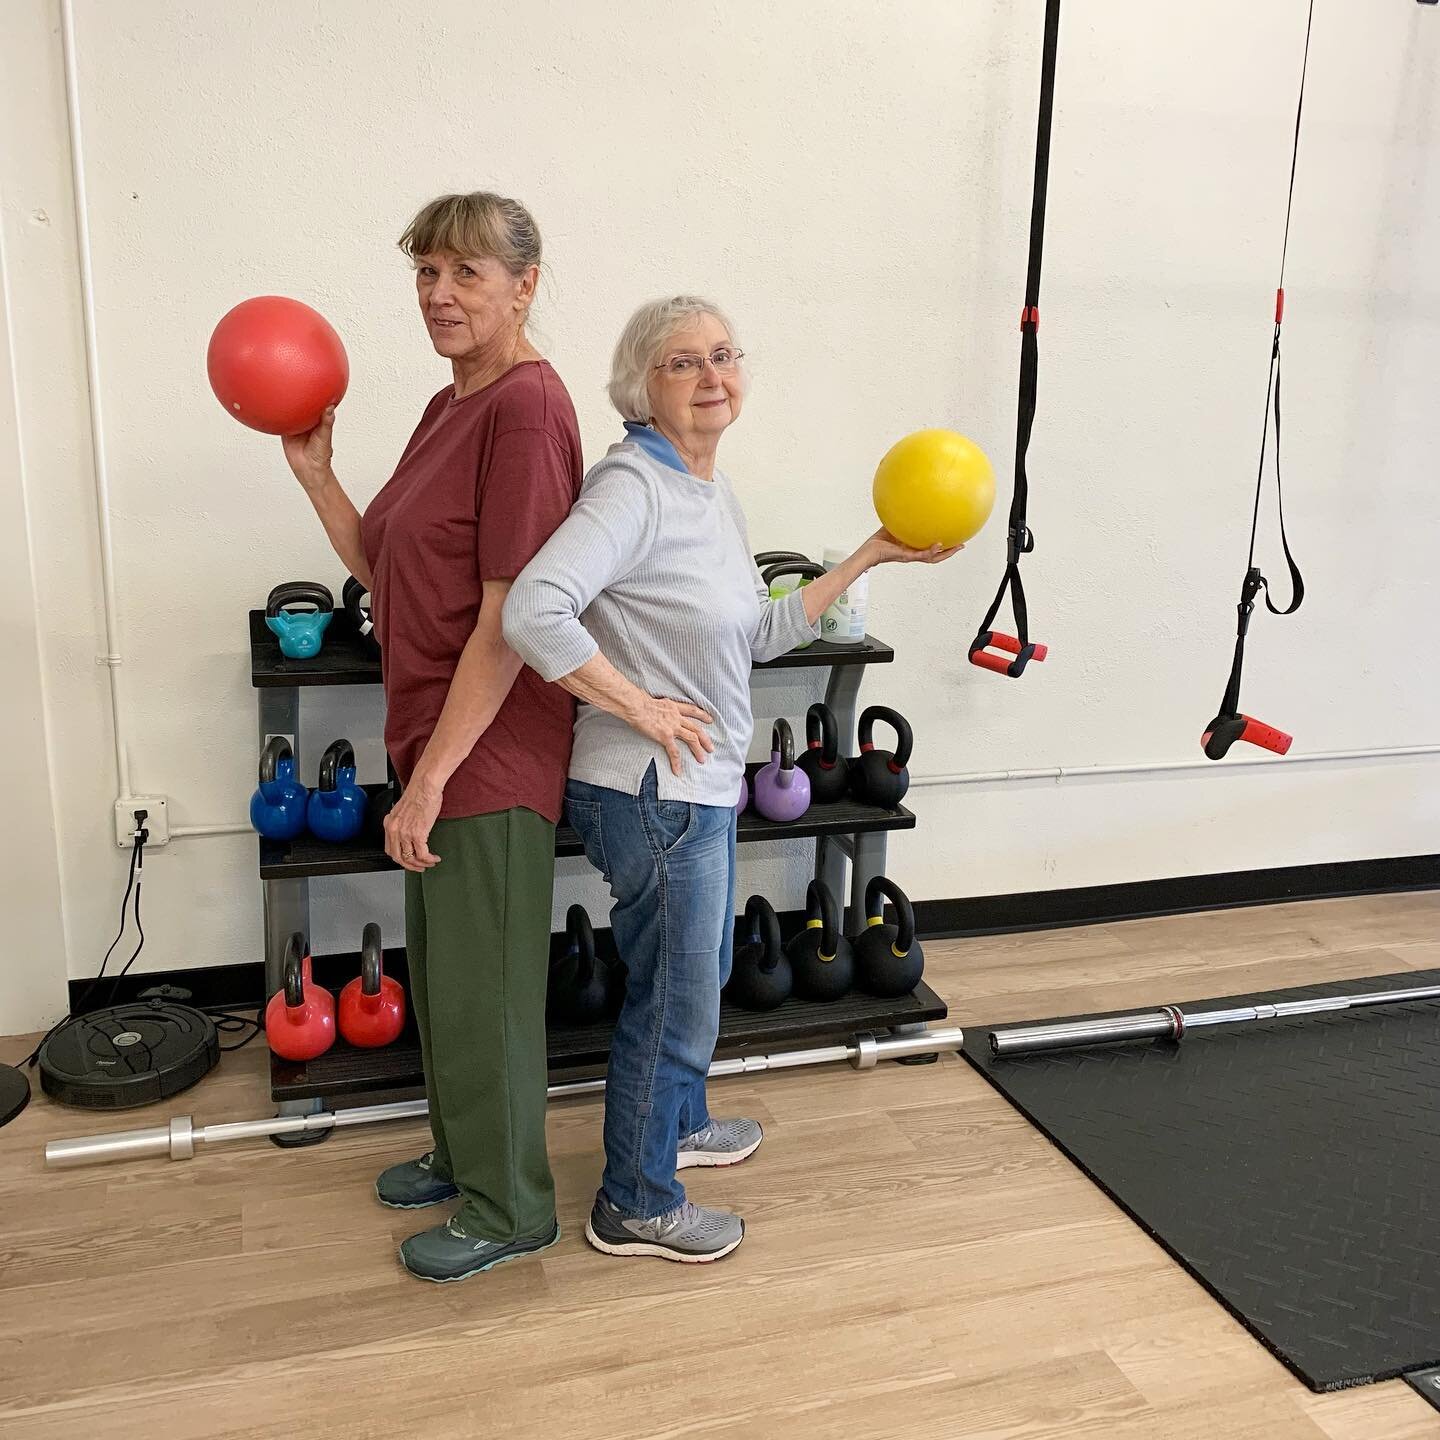 Due to its popularity, we&rsquo;ve added another 60+ Strength class to our schedule! You can now join this small group class on Mondays and Wednesdays at 10:30am.

There are LOTS of benefits for strength training as we age including&hellip;

Improved